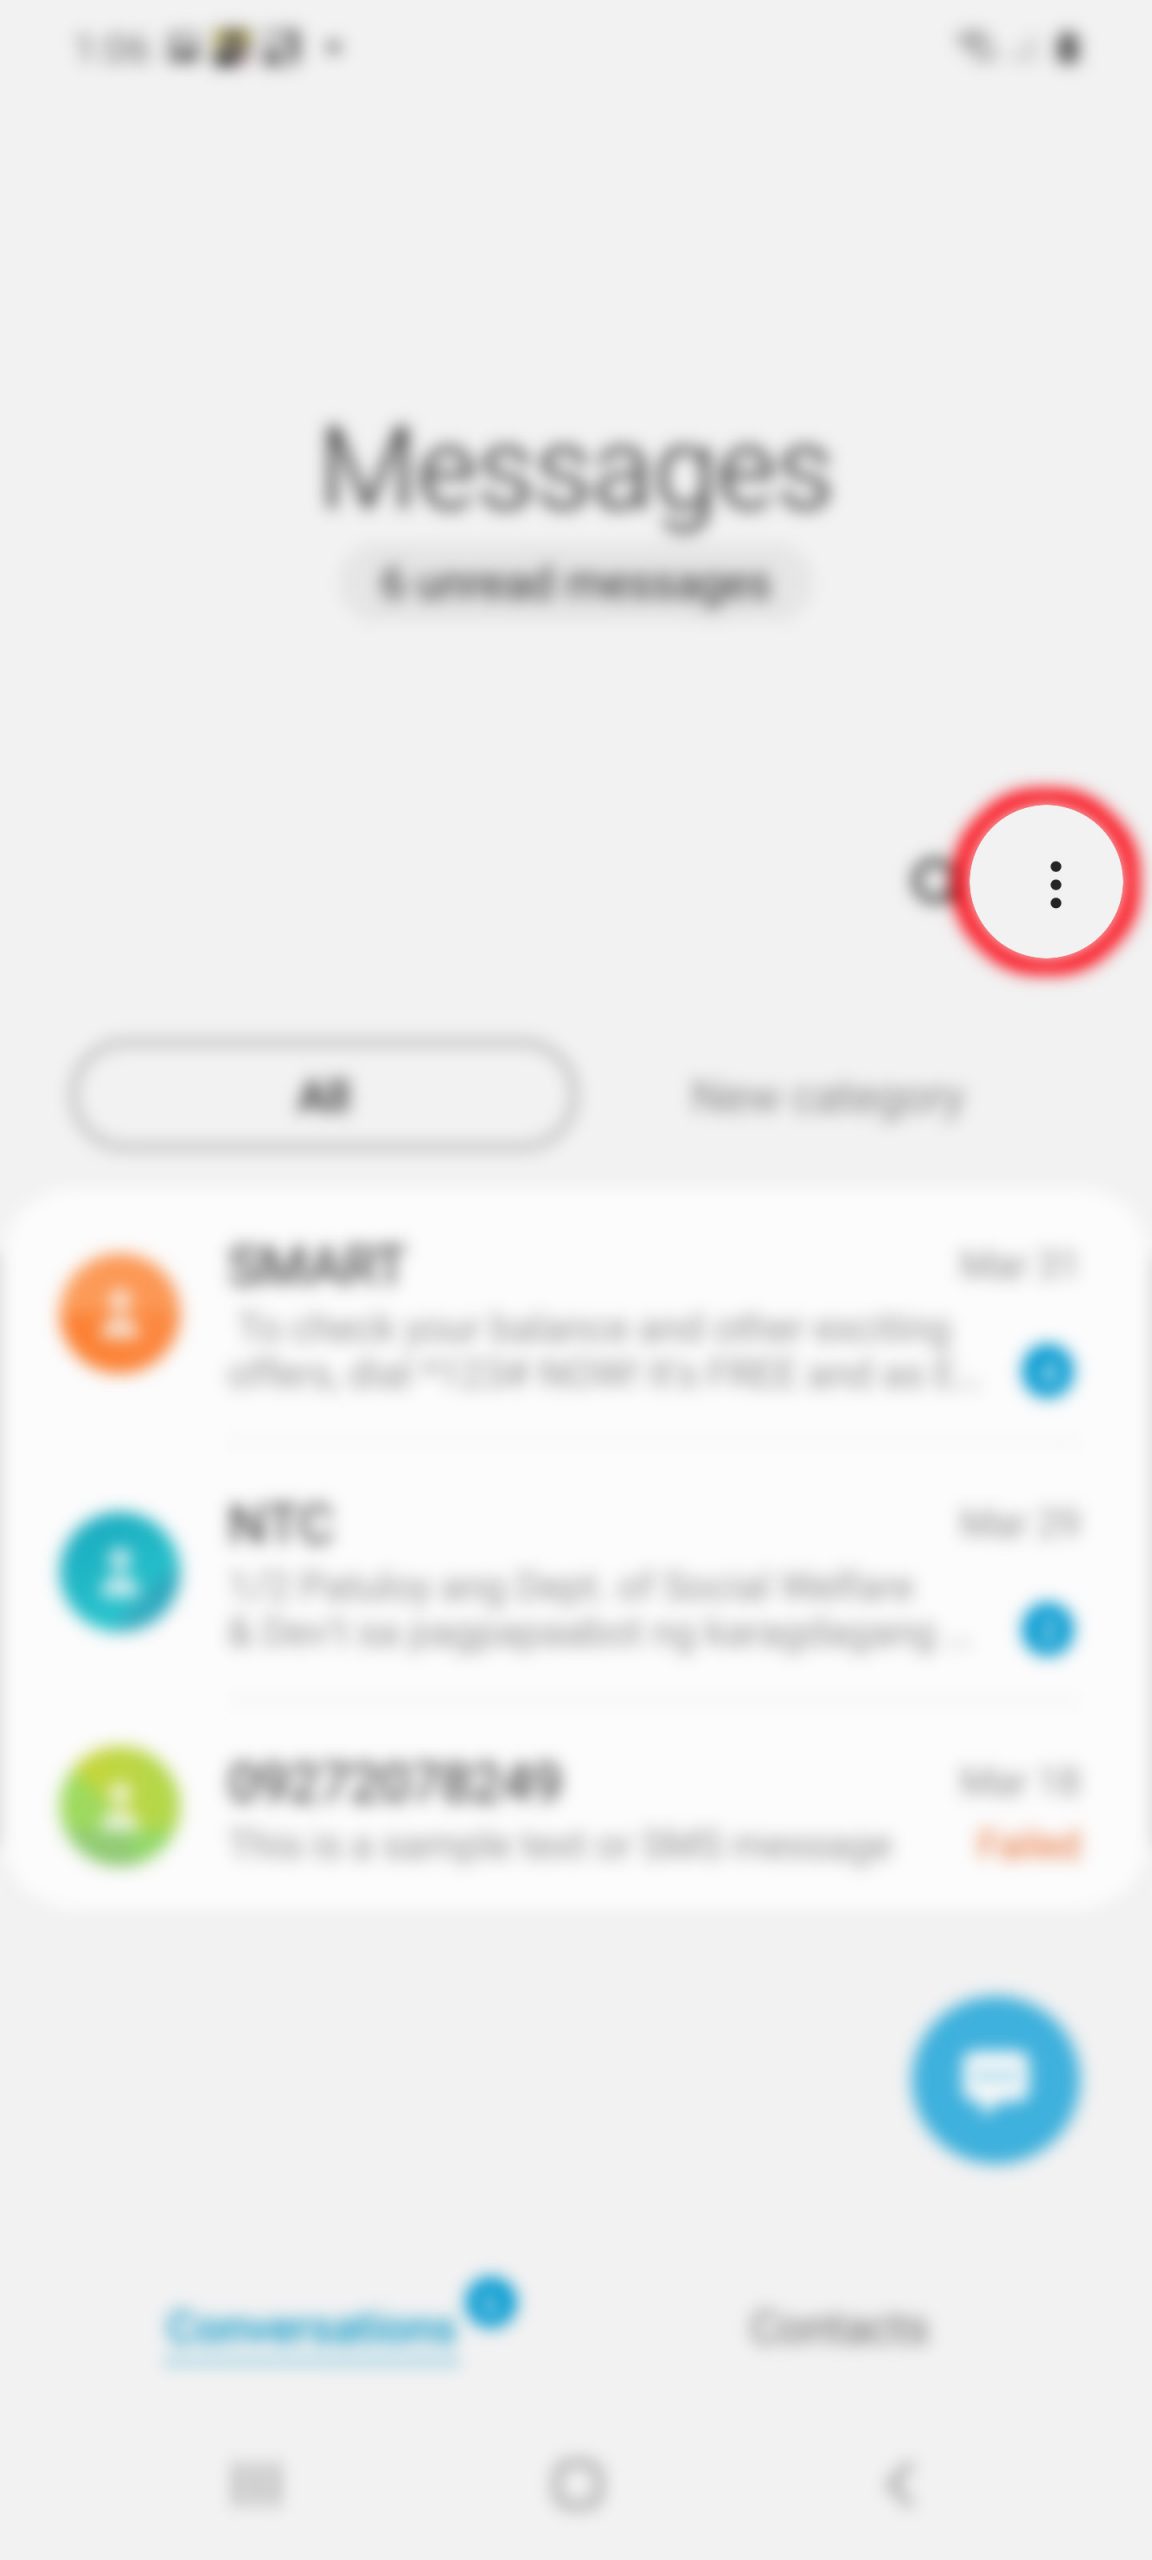 set up text notification on galaxy s20 - messages quick settings menu